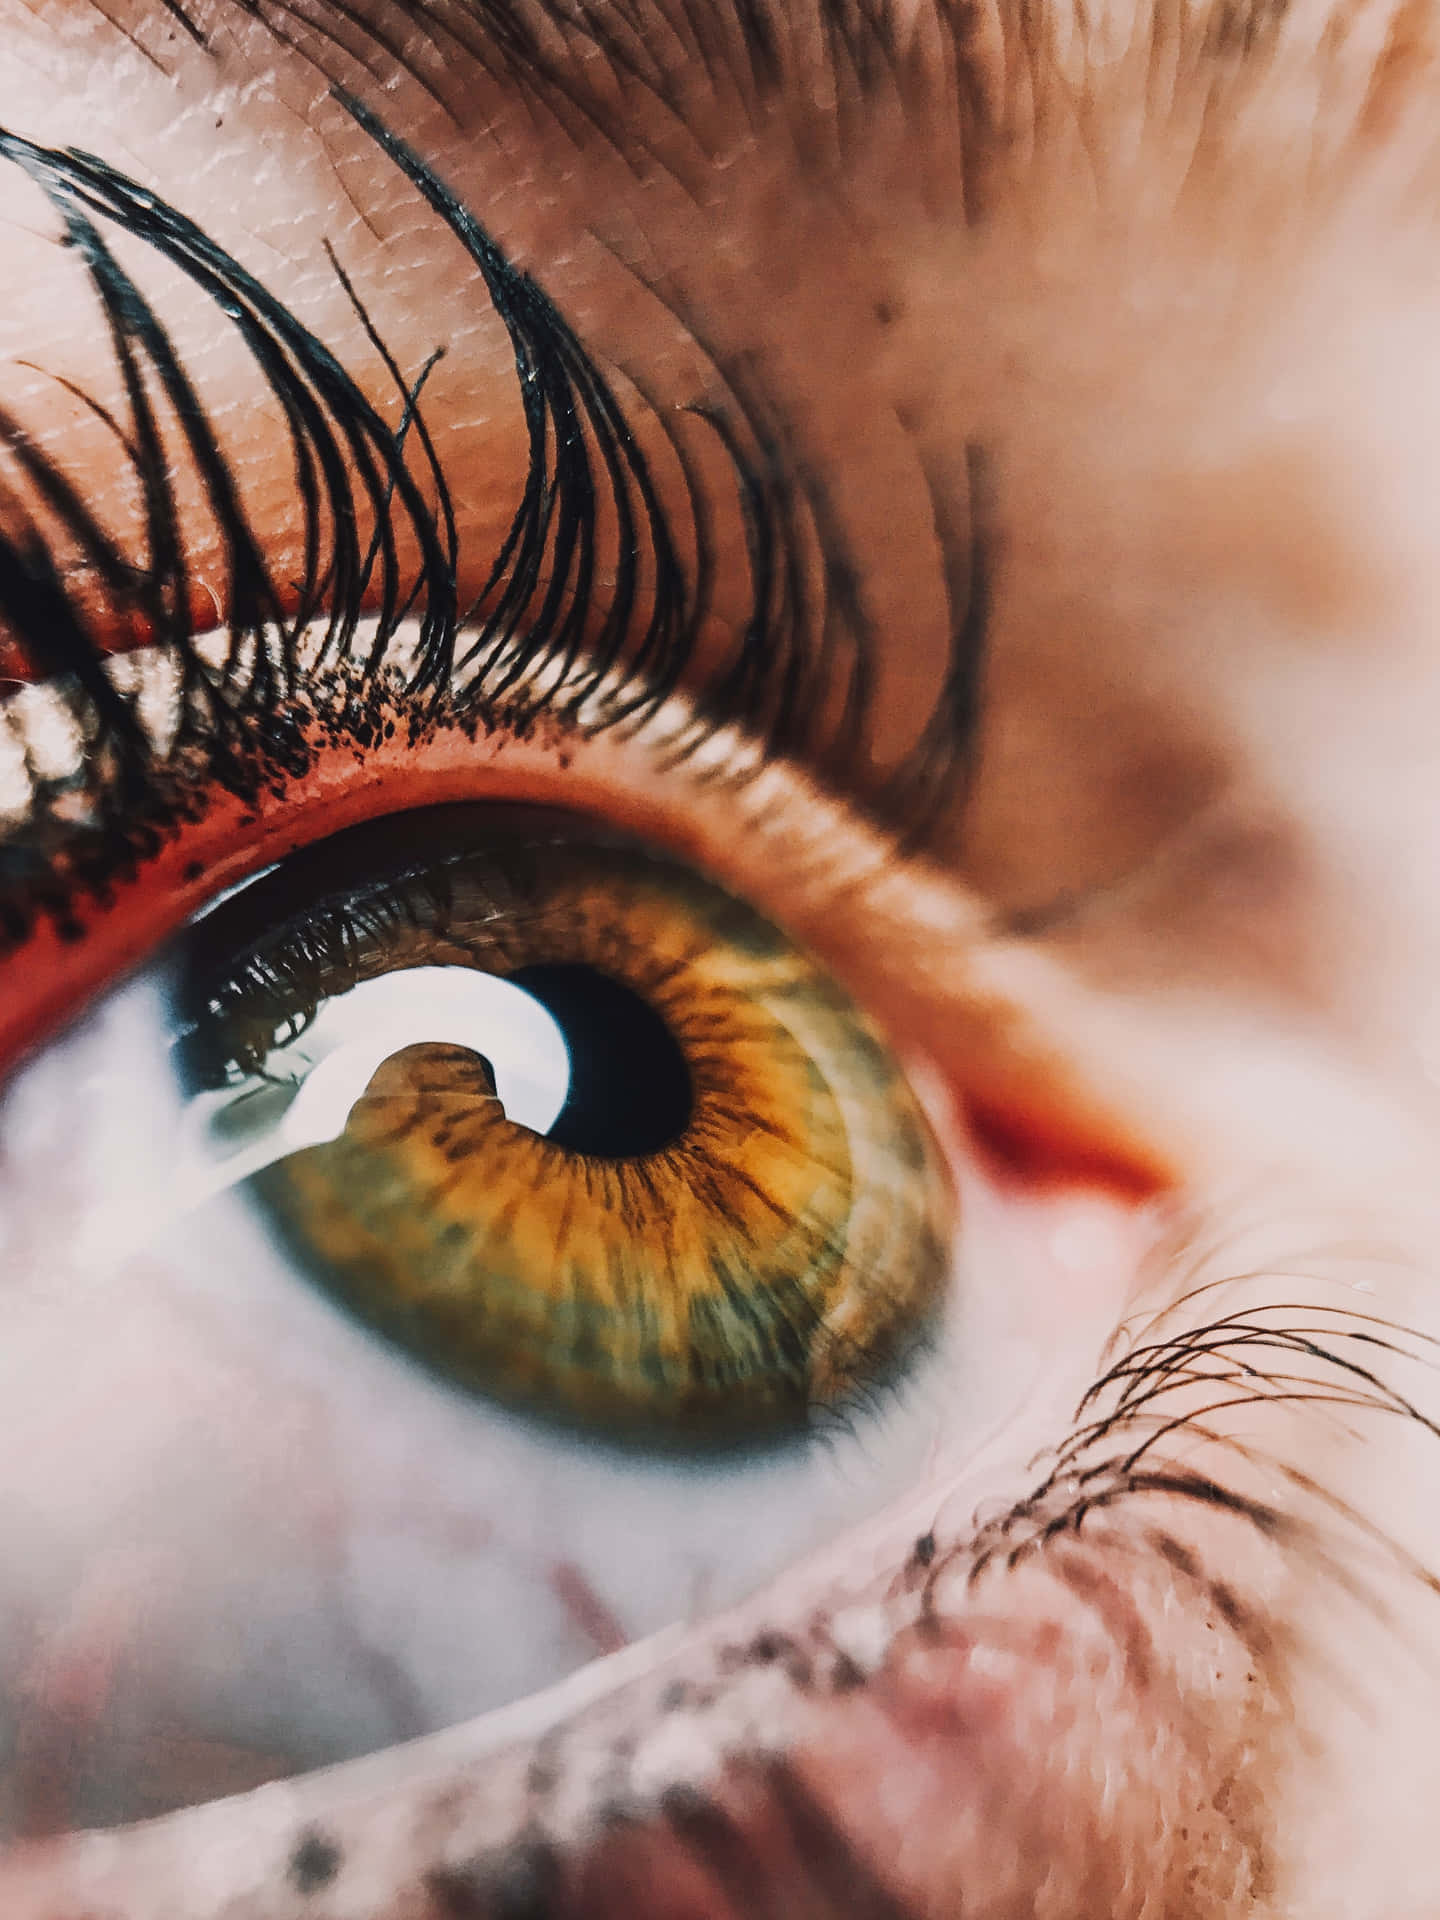 A Close Up Of A Person's Eye With Long Eyelashes